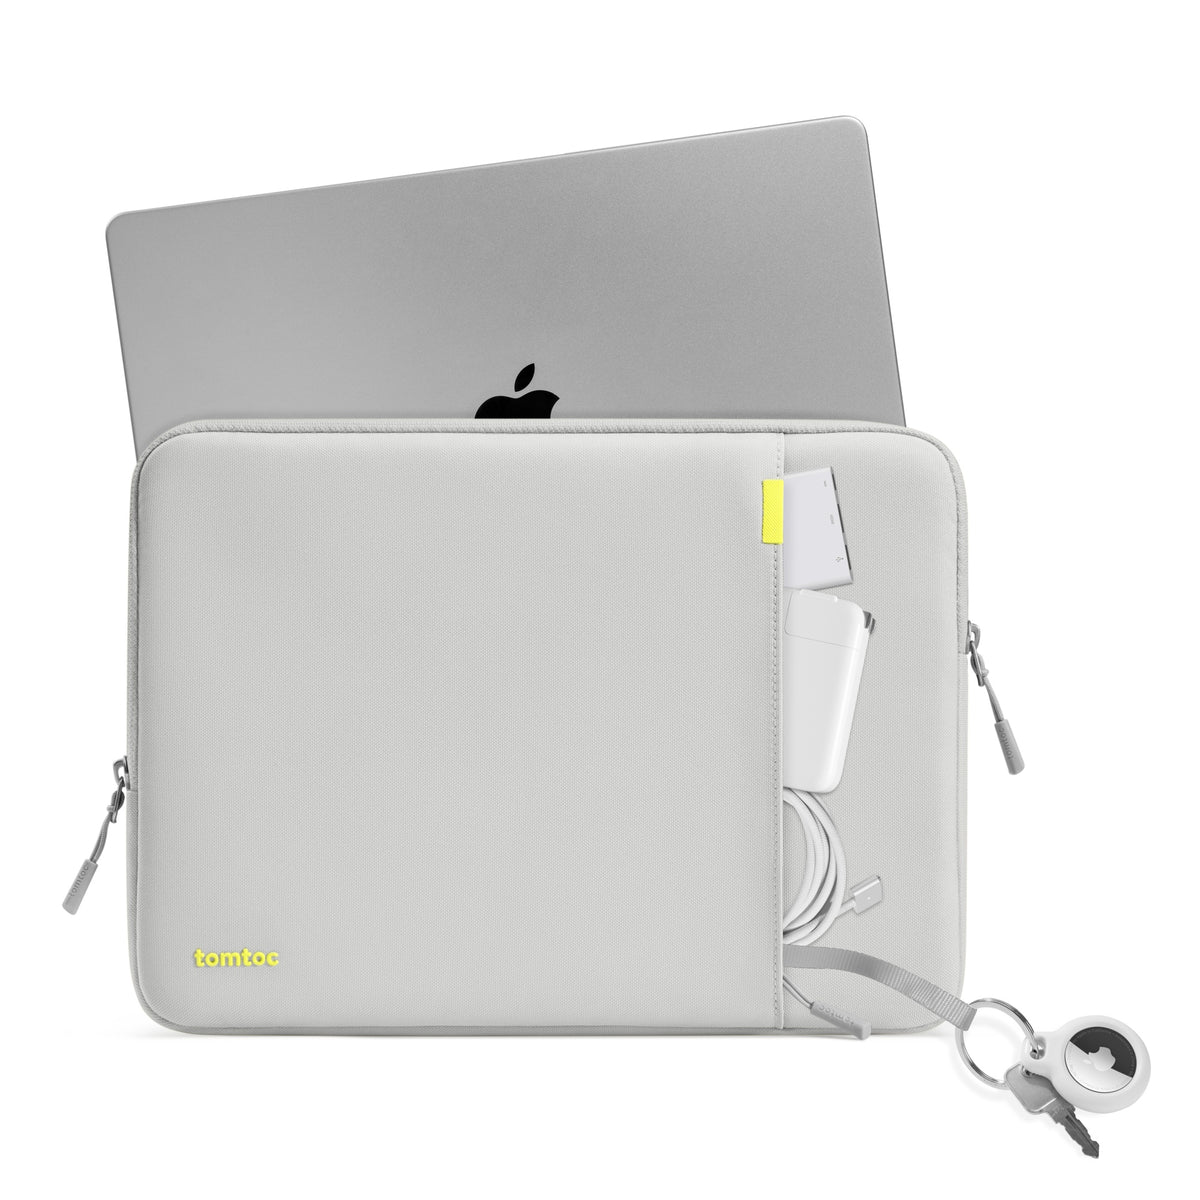 secondary_Defender-A13 Laptop Sleeve Kit for 13-inch MacBook | Gray